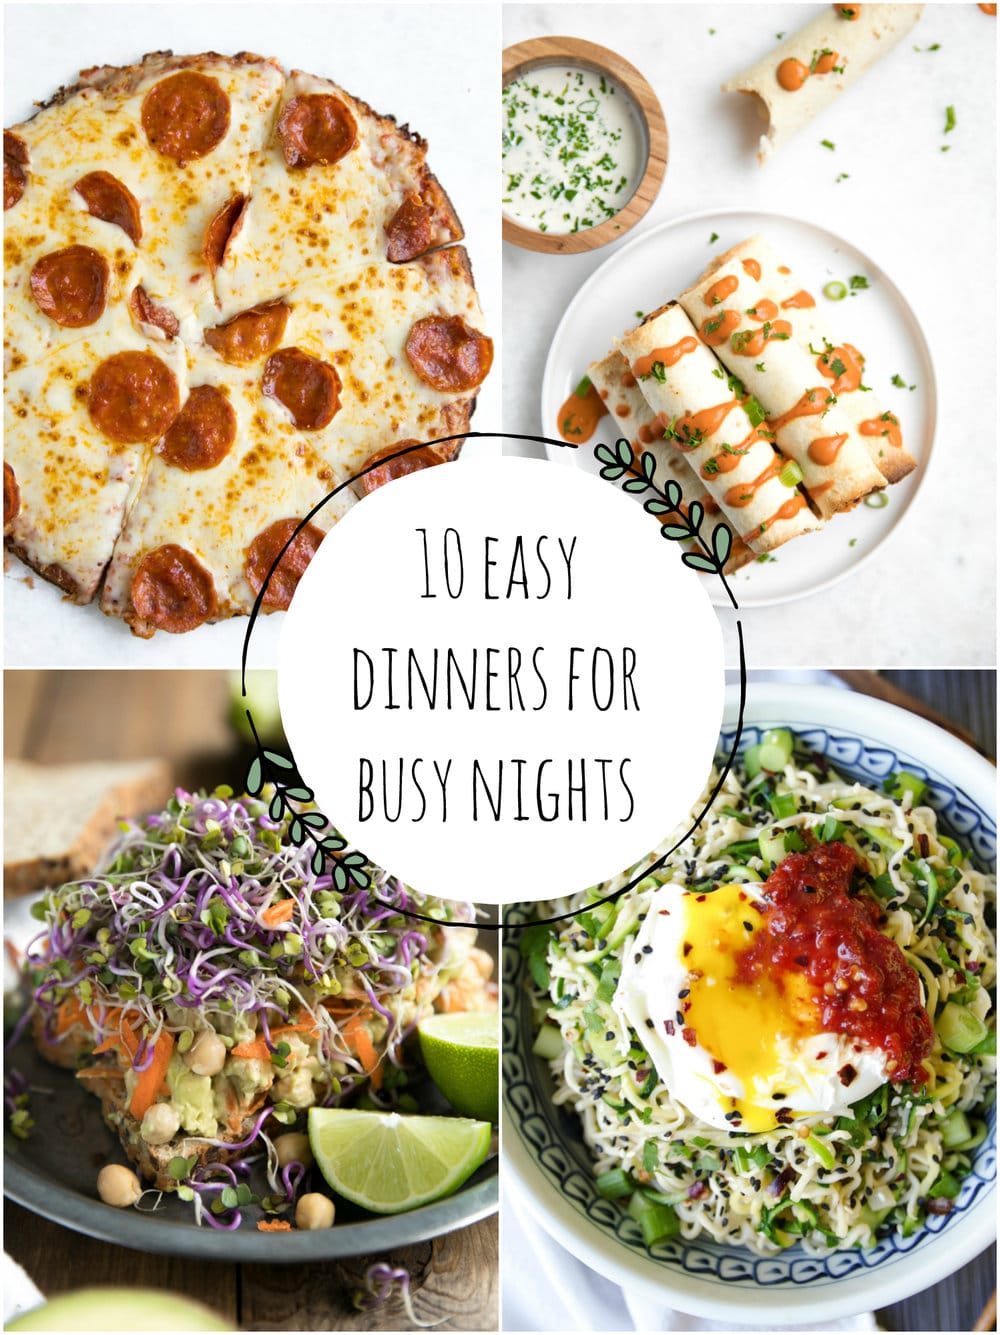 10 Easy Dinners for Busy Nights  The Forked Spoon